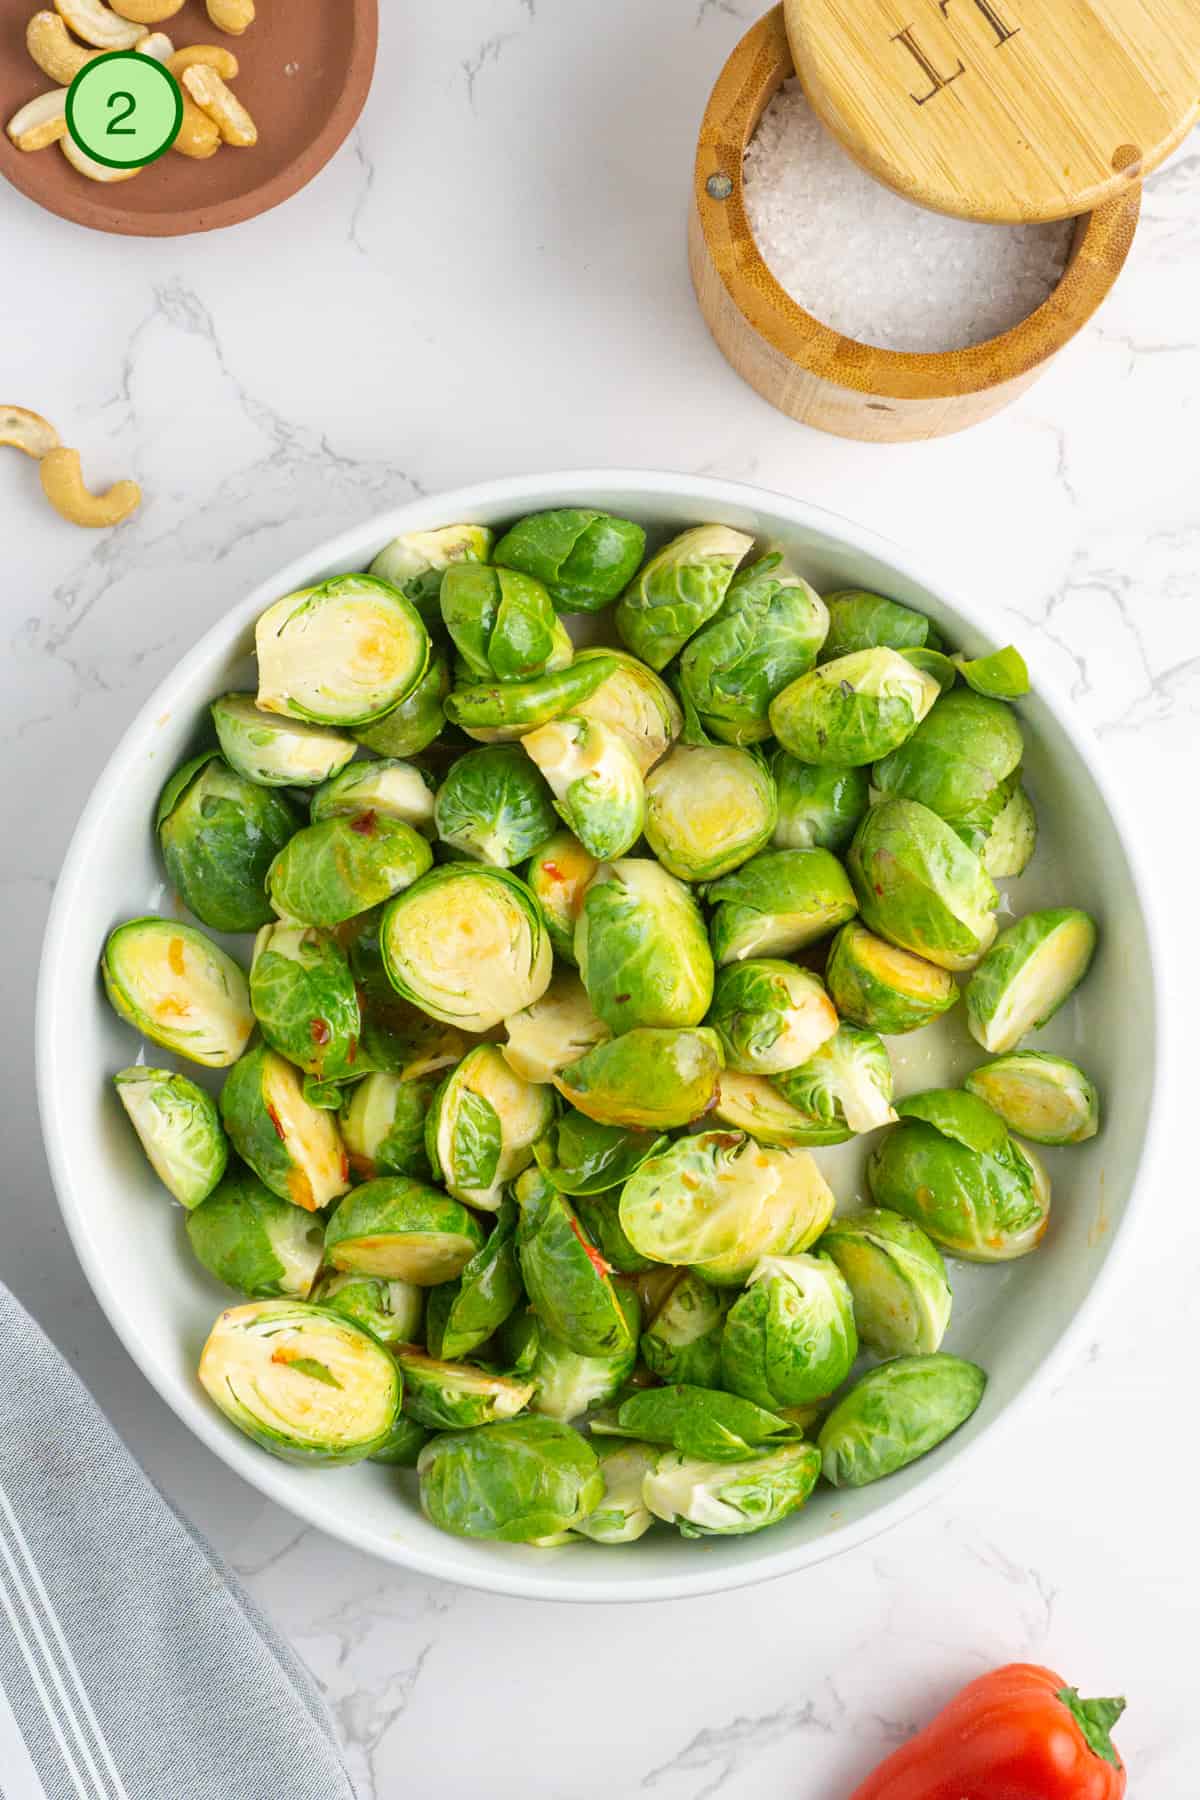 Season the brussels sprouts in a bowl.